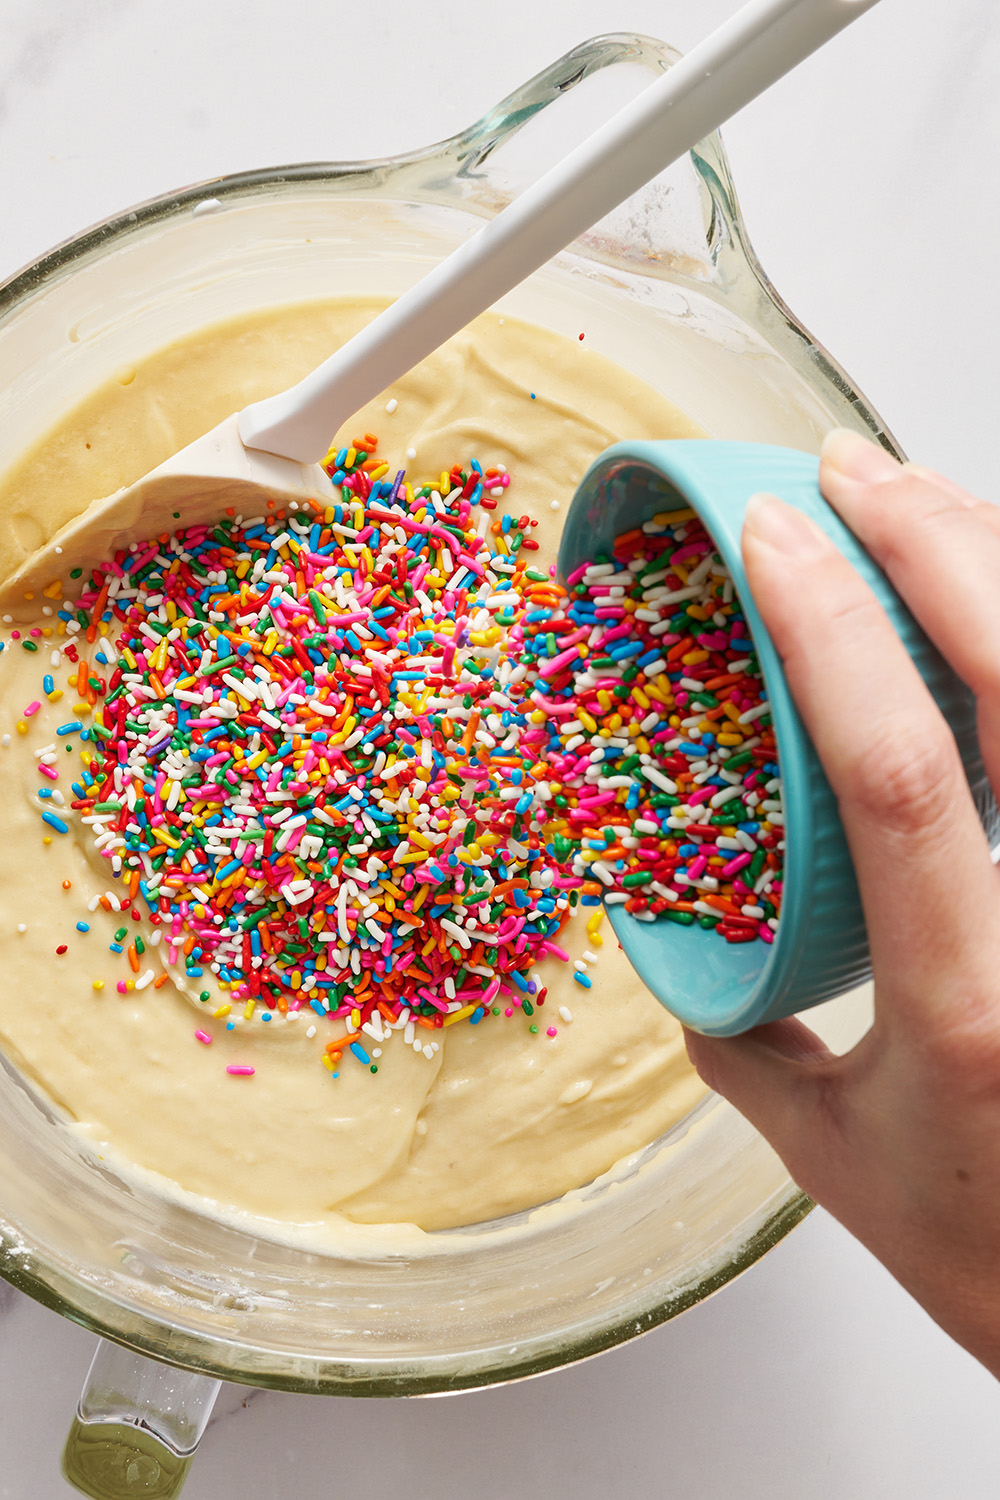 a hand pouring the sprinkles into the cake batter.